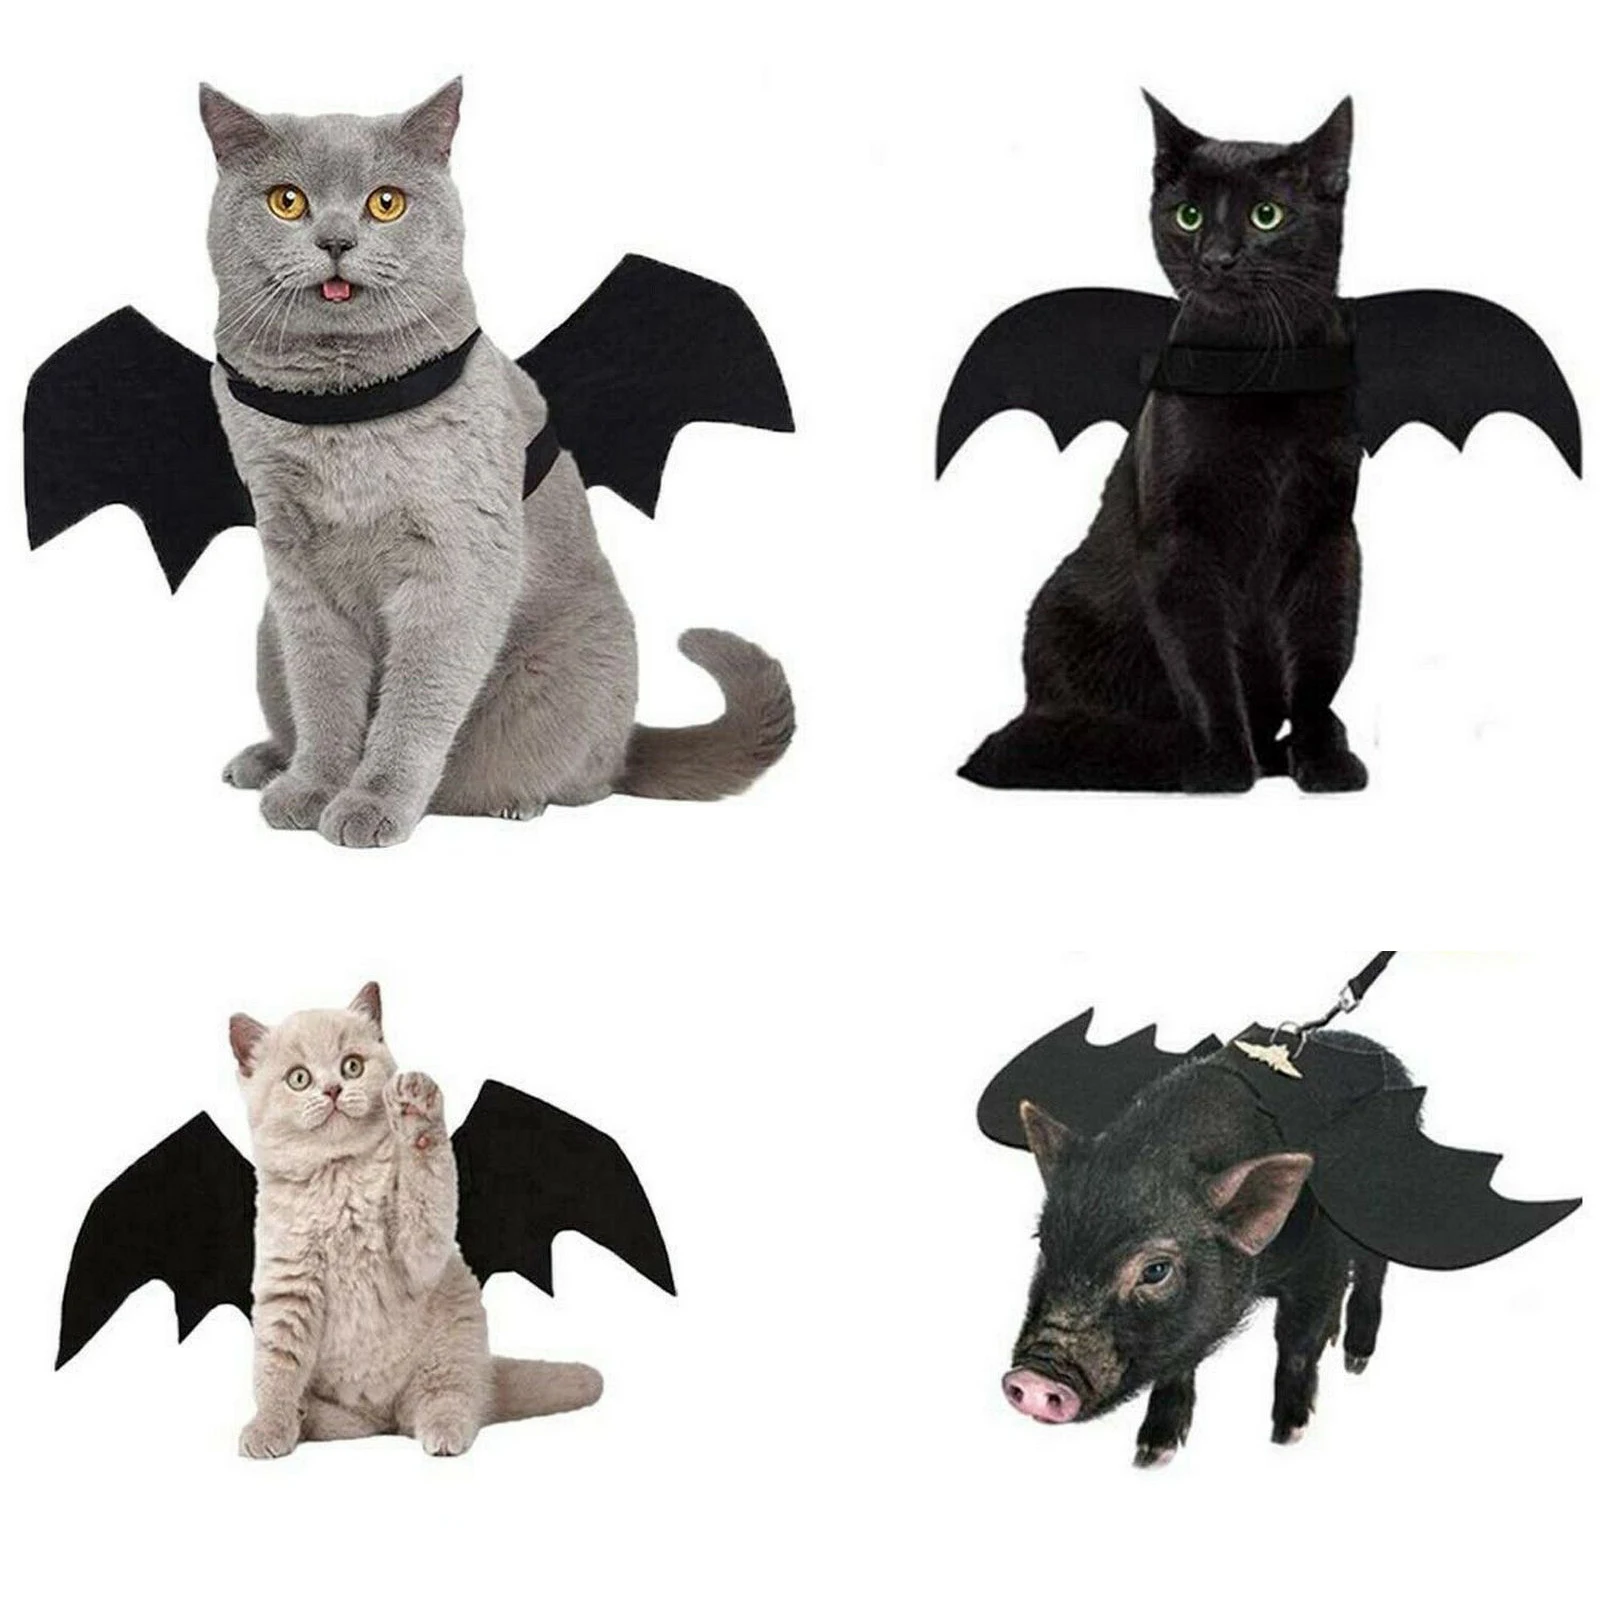 

Pet Dog Cat Bat Wing Cosplay Prop Halloween Bat Fancy Dress Costume Outfit Wings Cat Costumes Photo Props With Traction leash